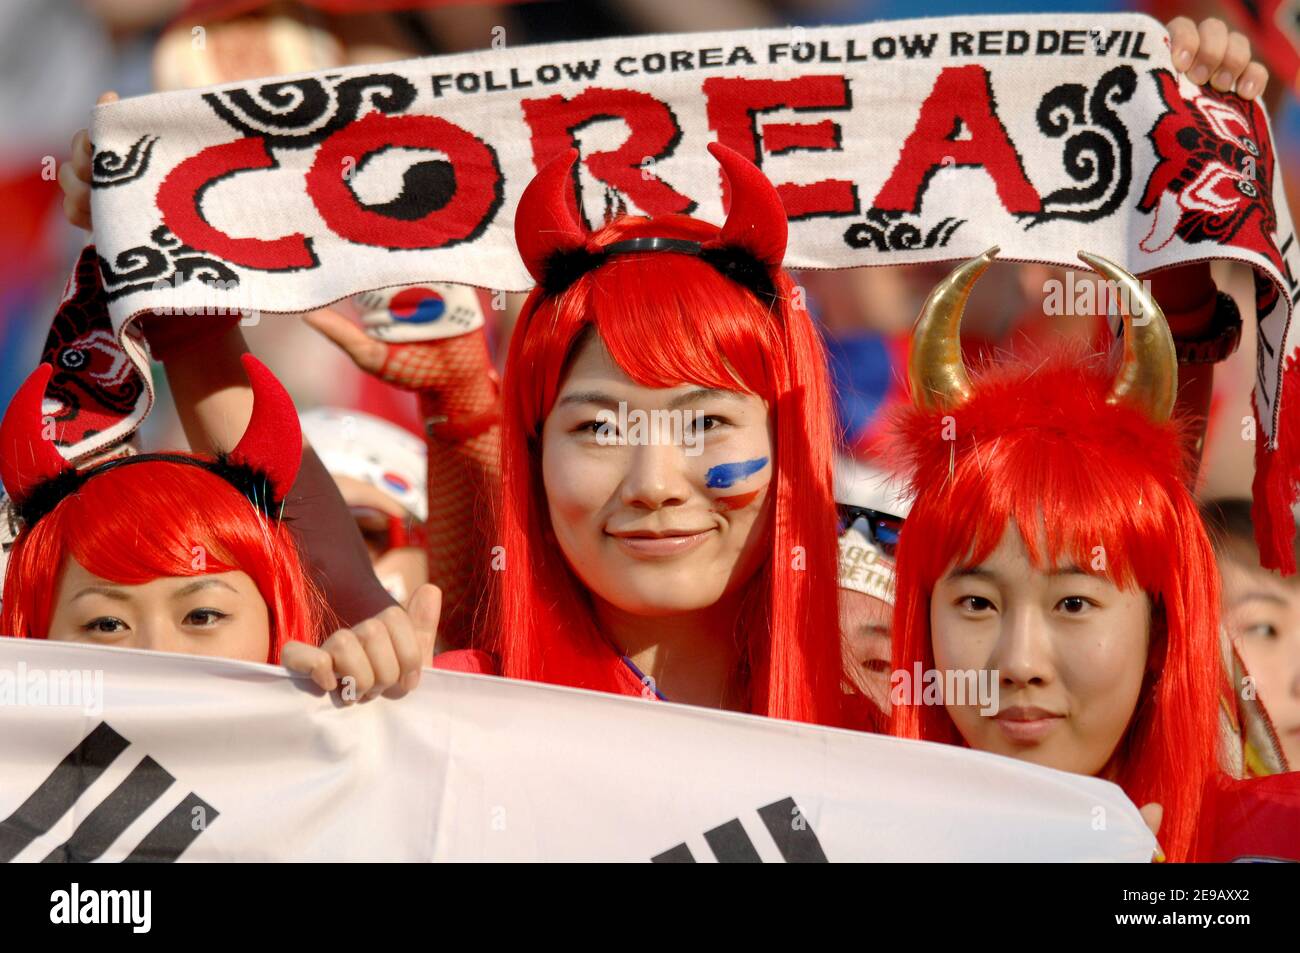 South Korea's Fans during the World Cup 2006, Group G, France vs South Korea at the Zentralstadion stadium in Leipzig, Germany on June 18, 2006. The game ended in a draw 1-1. Photo by Gouhier-Hahn-Orban/Cameleon/ABACAPRESS.COM Stock Photo